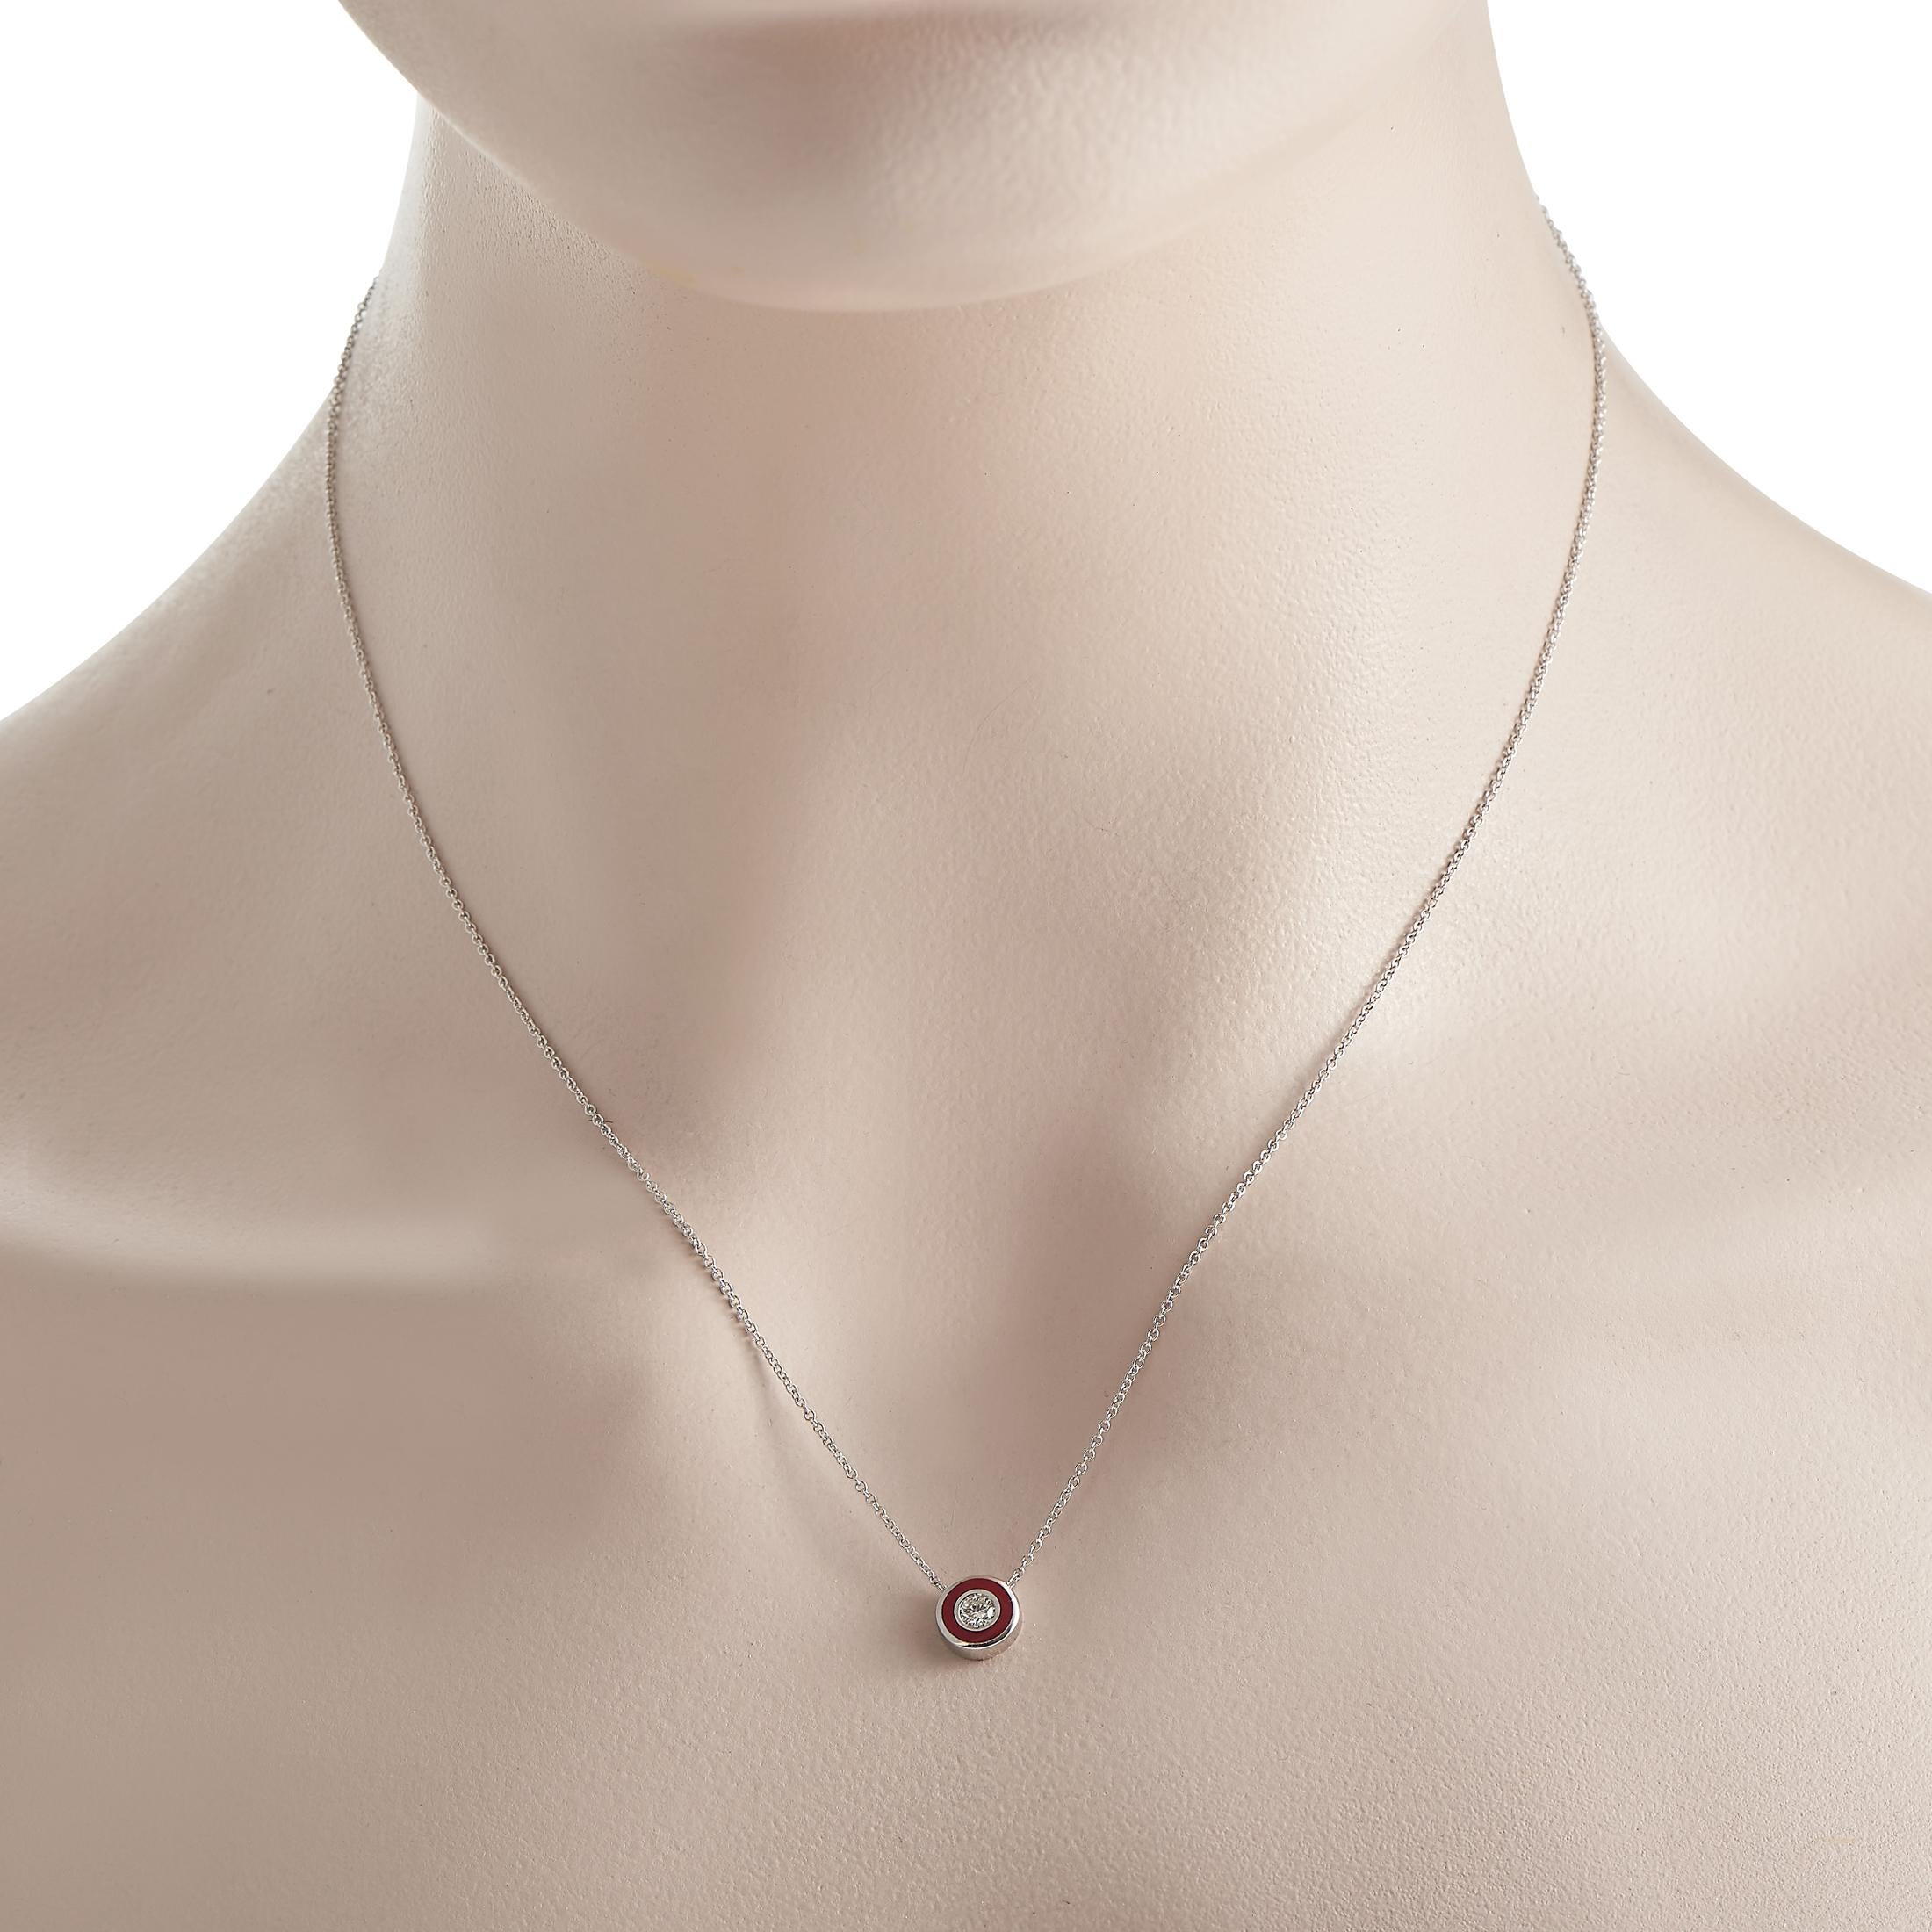 Put on this understated necklace and effortlessly spice up your casual attire with a bit of colour and a hint of sparkle. This LB Exclusive piece features a 17-long chain necklace with a lobster clasp and a 0.25-wide disc pendant. The pendant